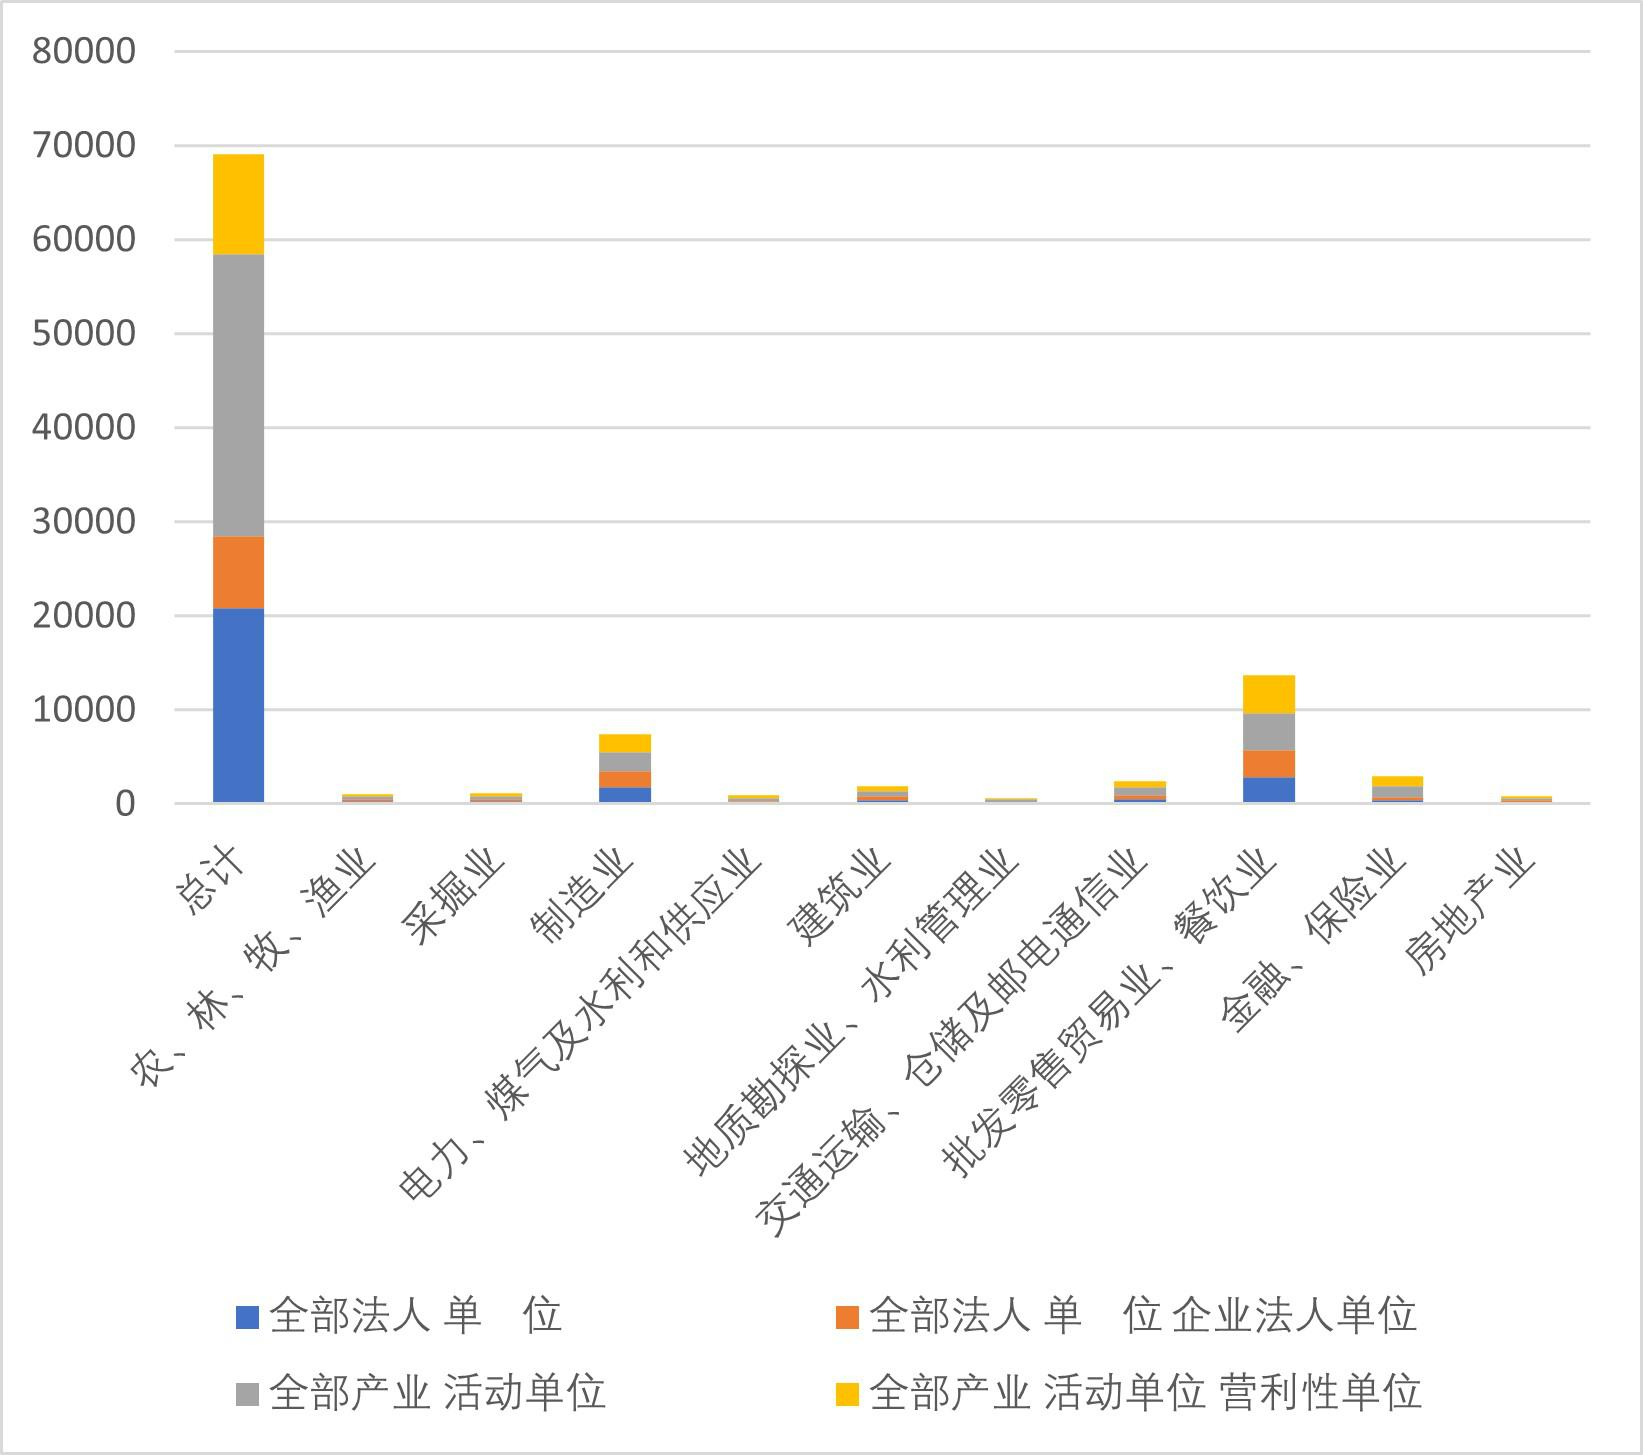 Bulletin of the second general survey of basic units in Qinghai Province (2001-2003)